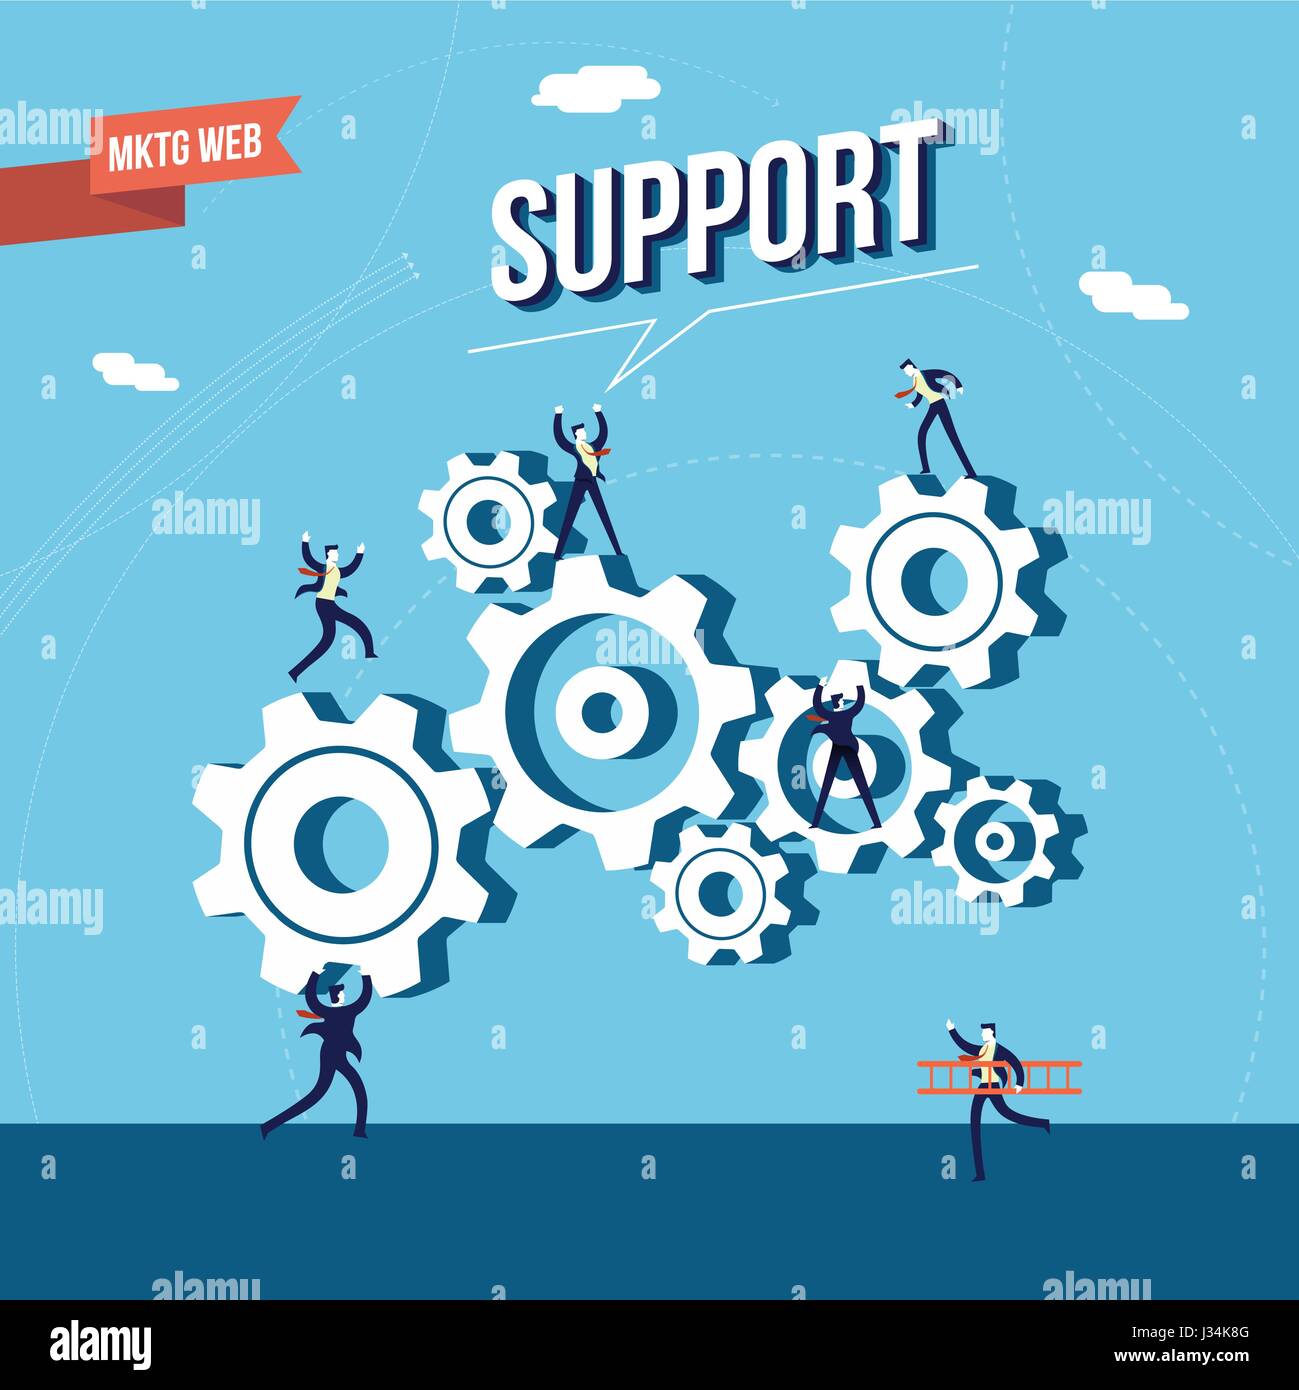 Web marketing support concept illustration with business men team and cog wheels. EPS10 vector. Stock Vector